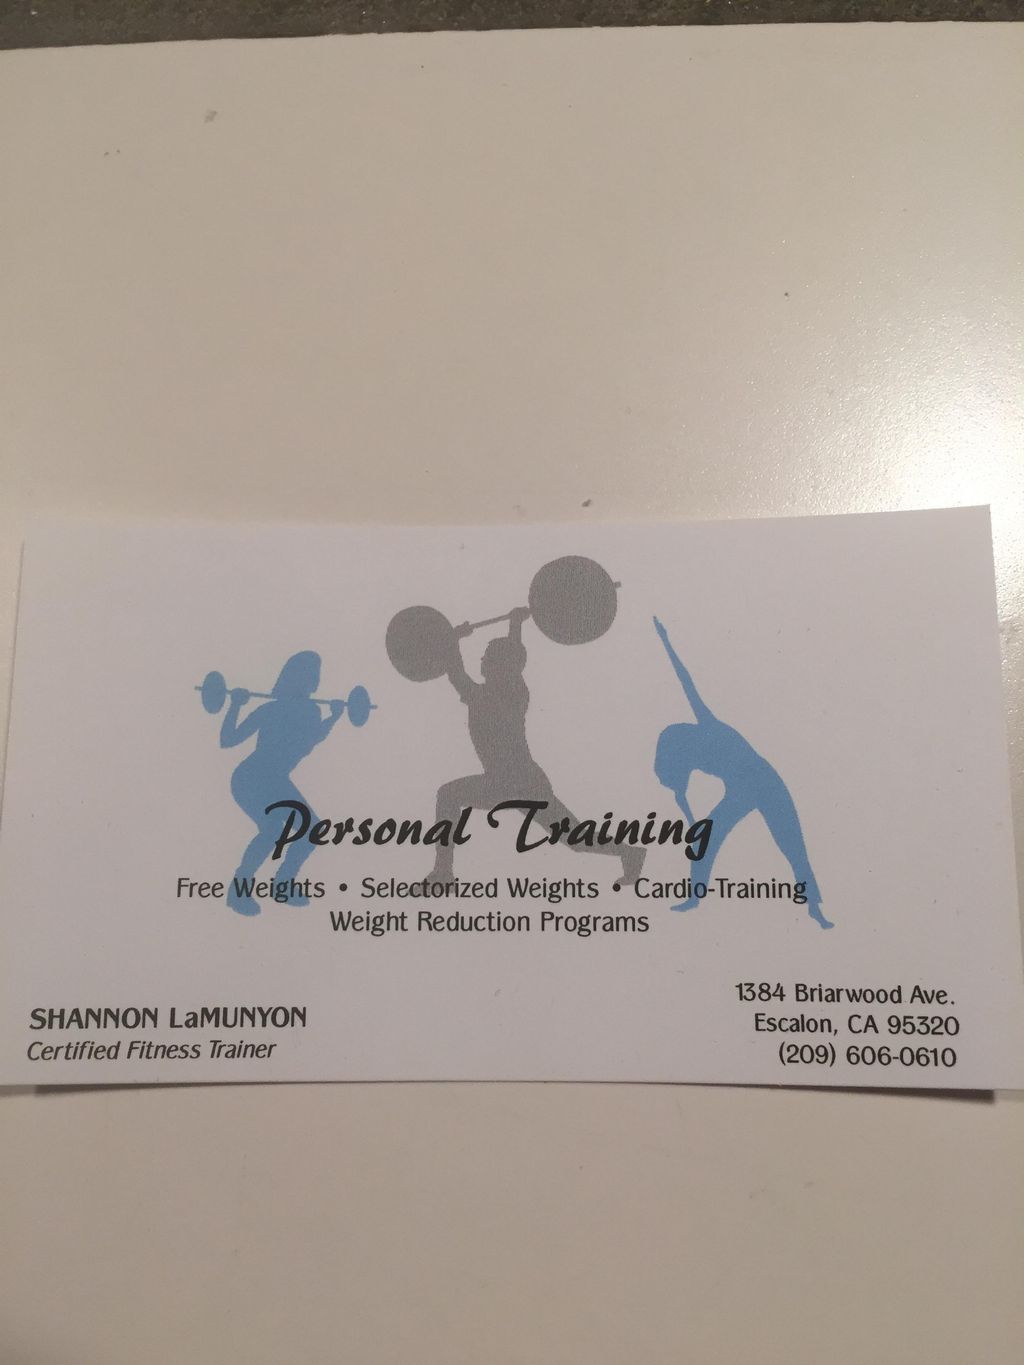 Escalon personal training and fitness